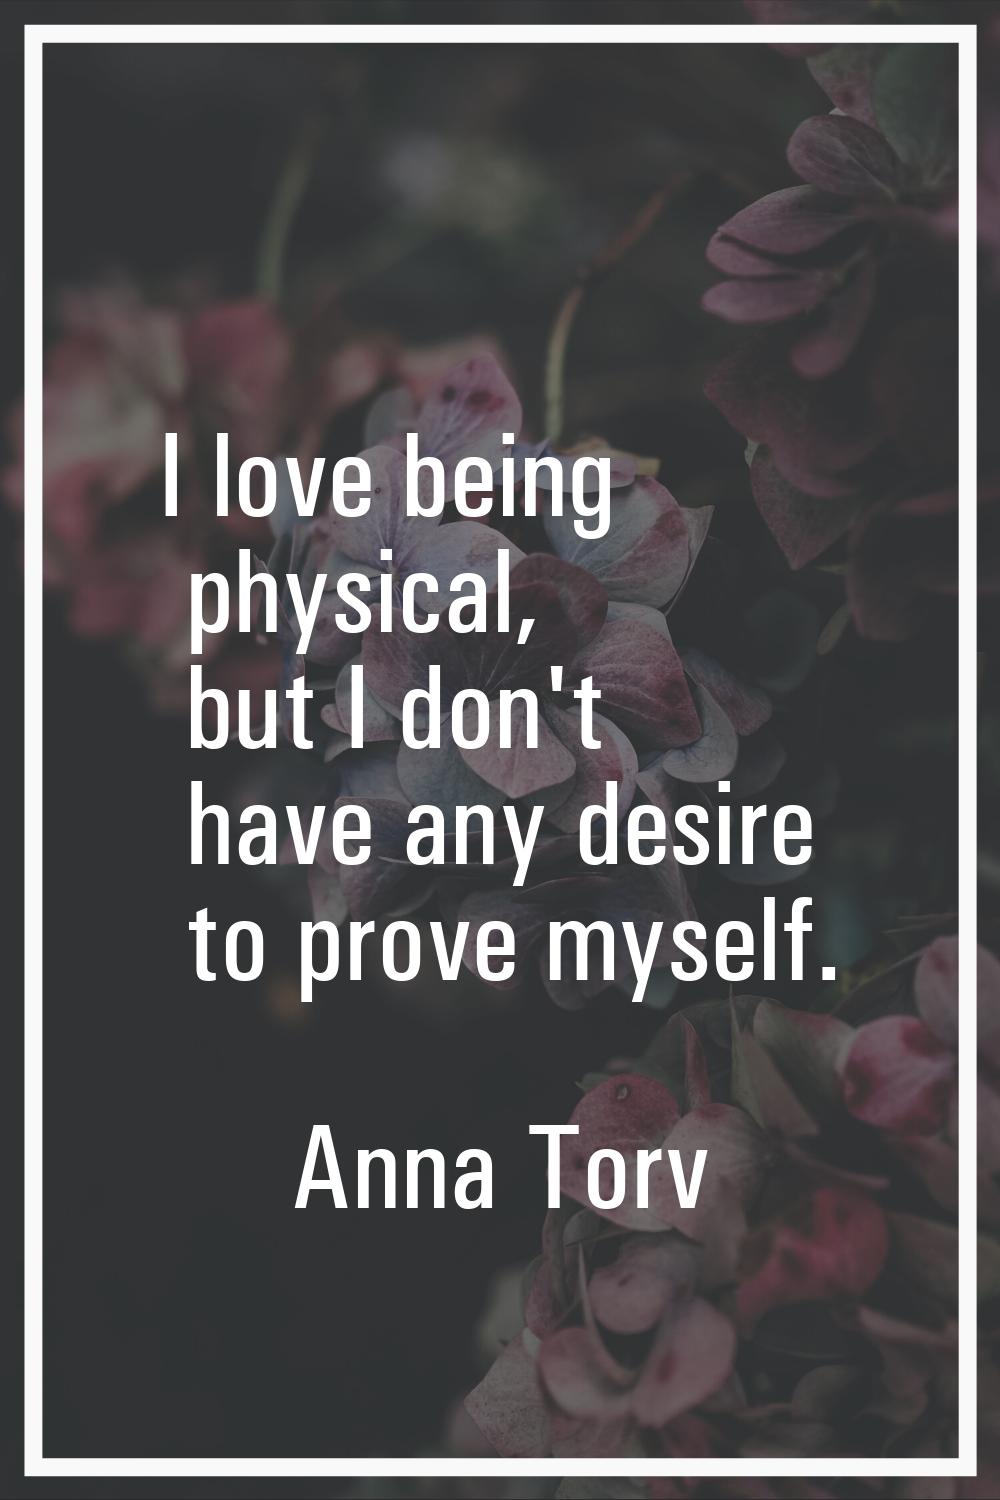 I love being physical, but I don't have any desire to prove myself.